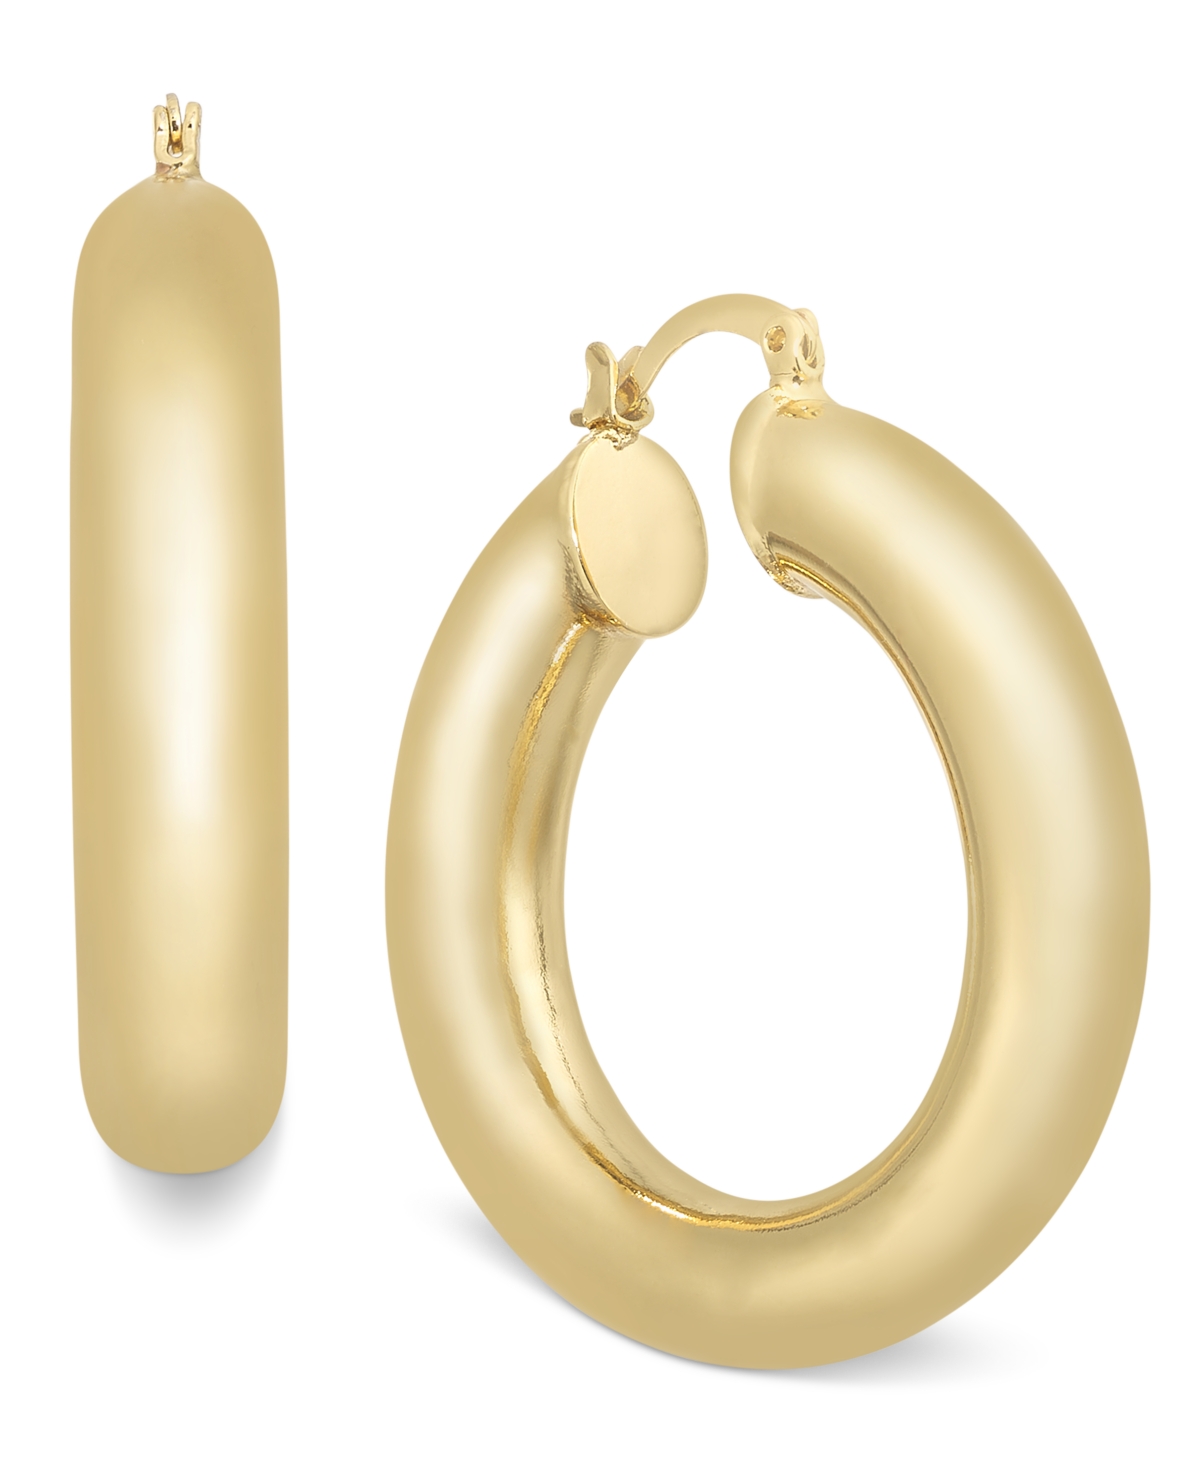 18k Gold-Plated Medium Thick Hoop Earrings, 1.77" - Gold